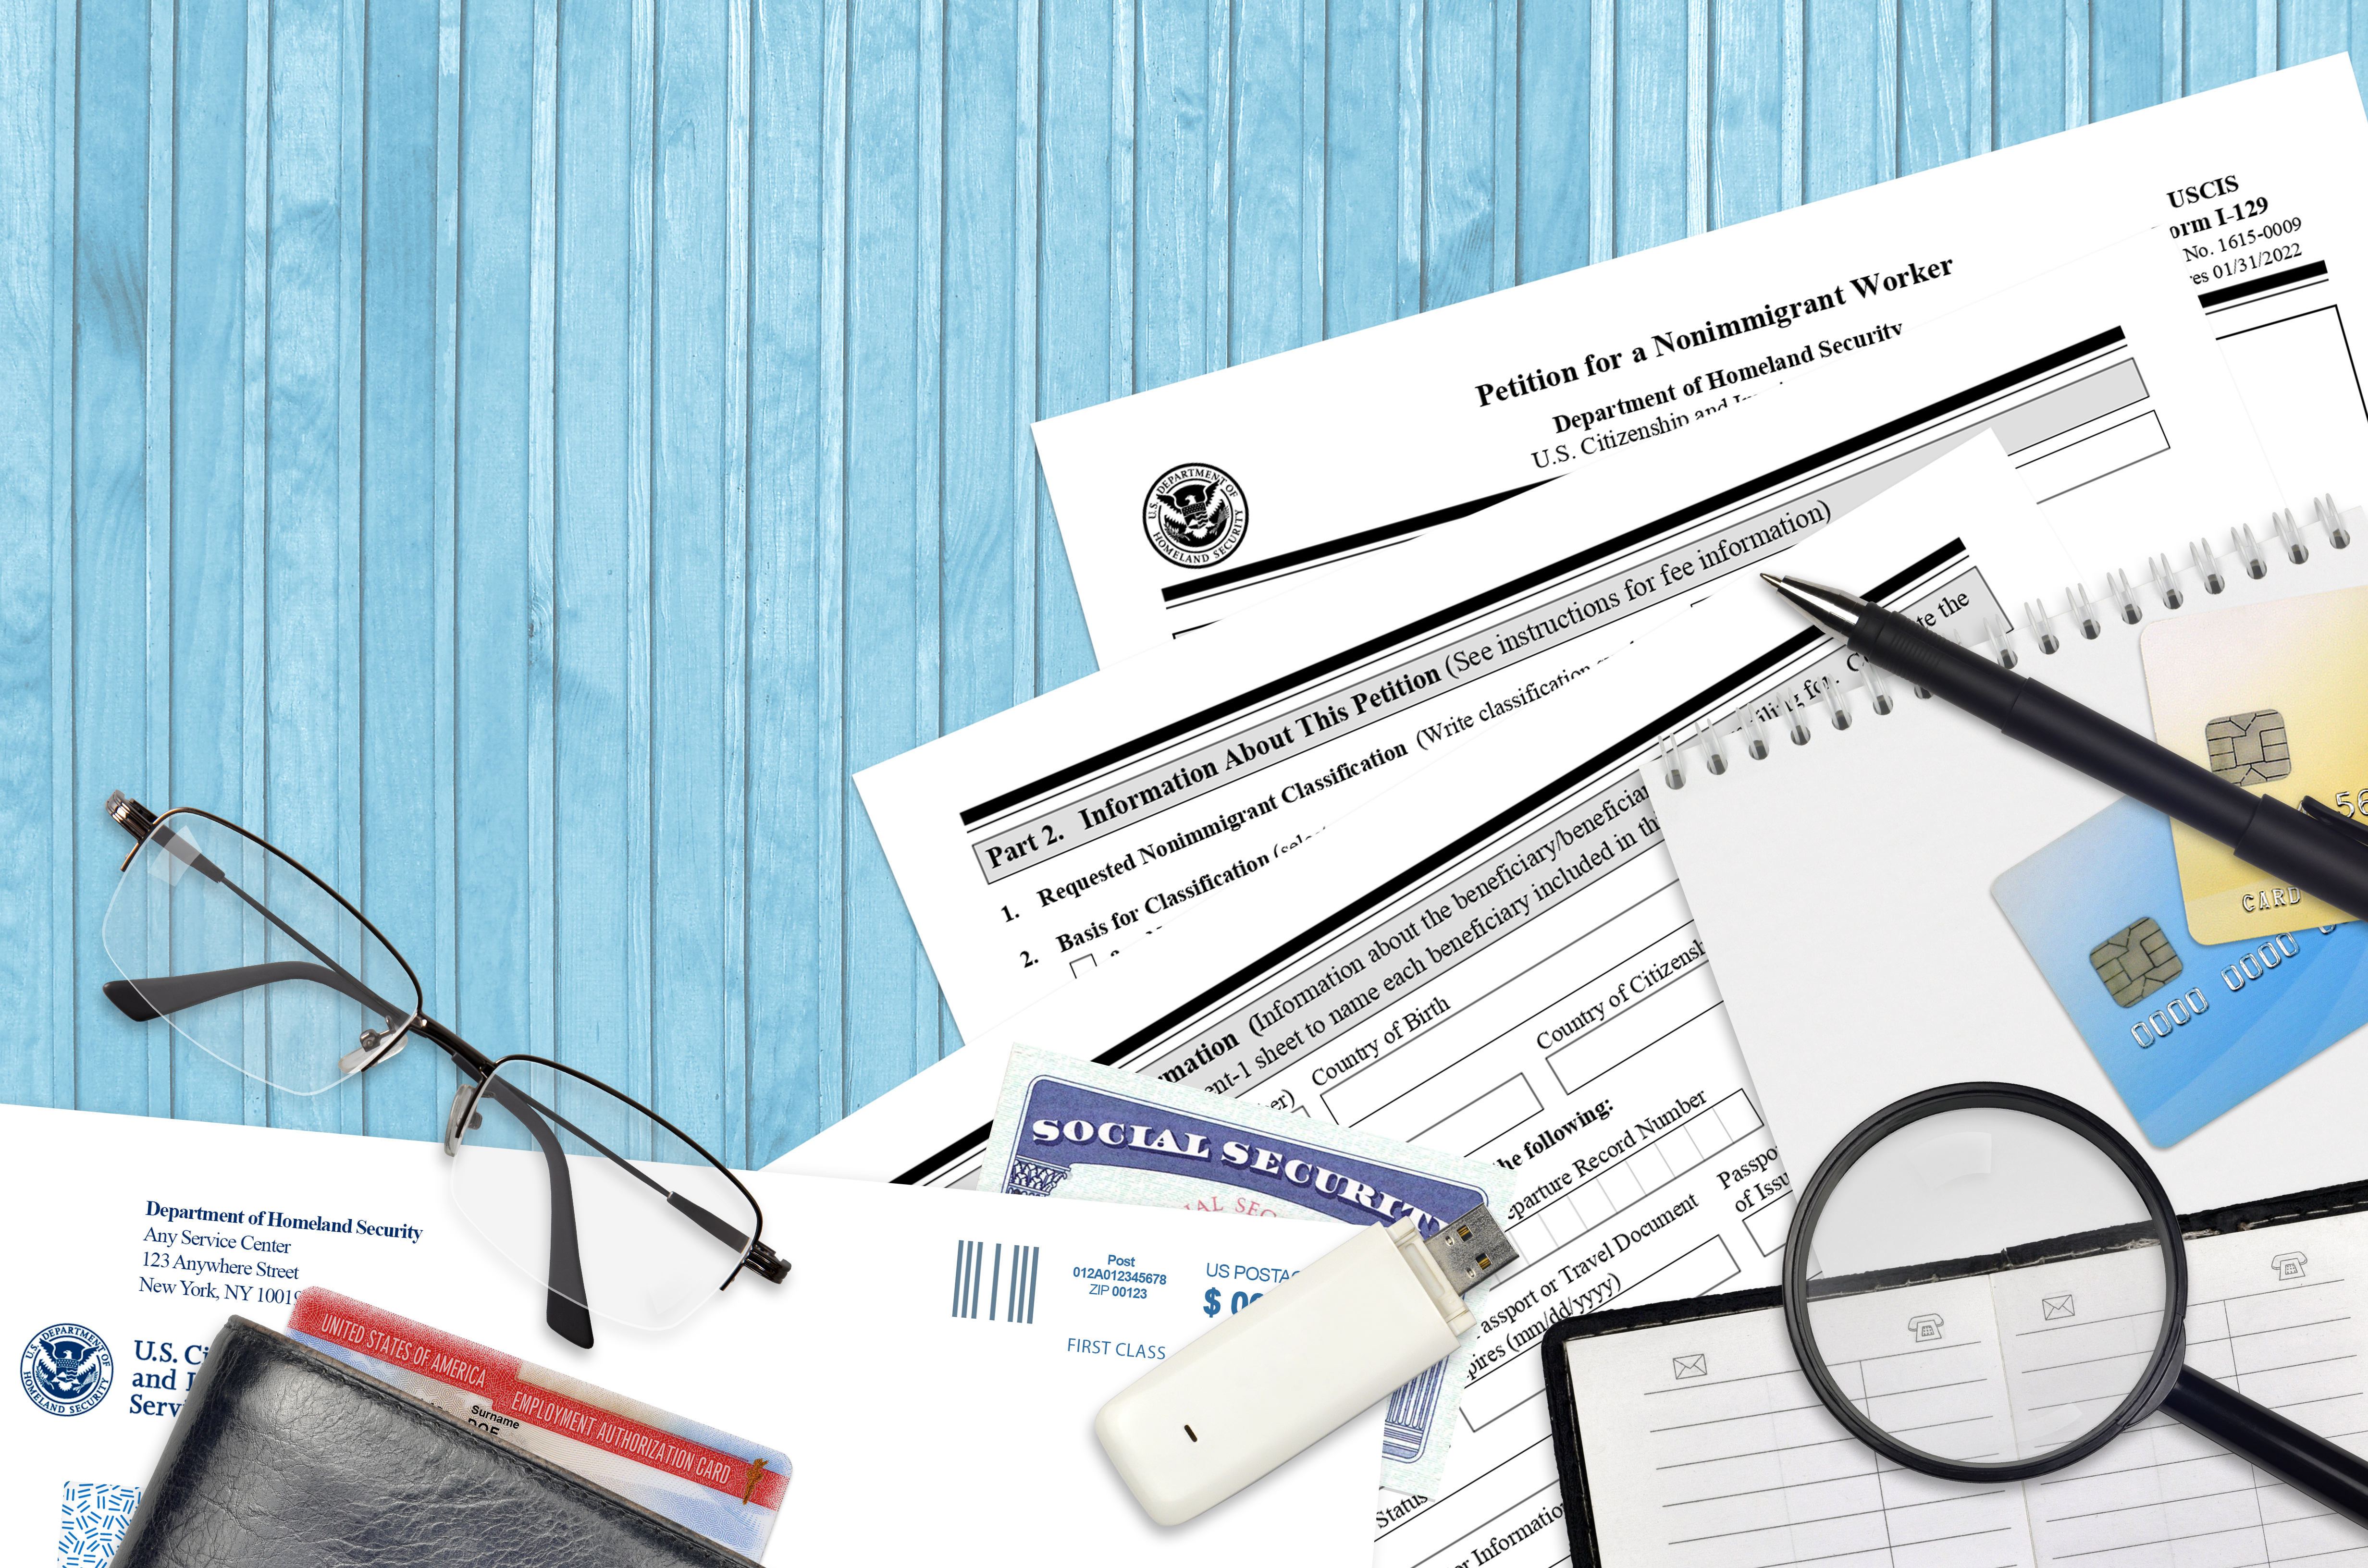 Now Is the Time to Prepare for H-1B Cap Filings for New Hires in 2021